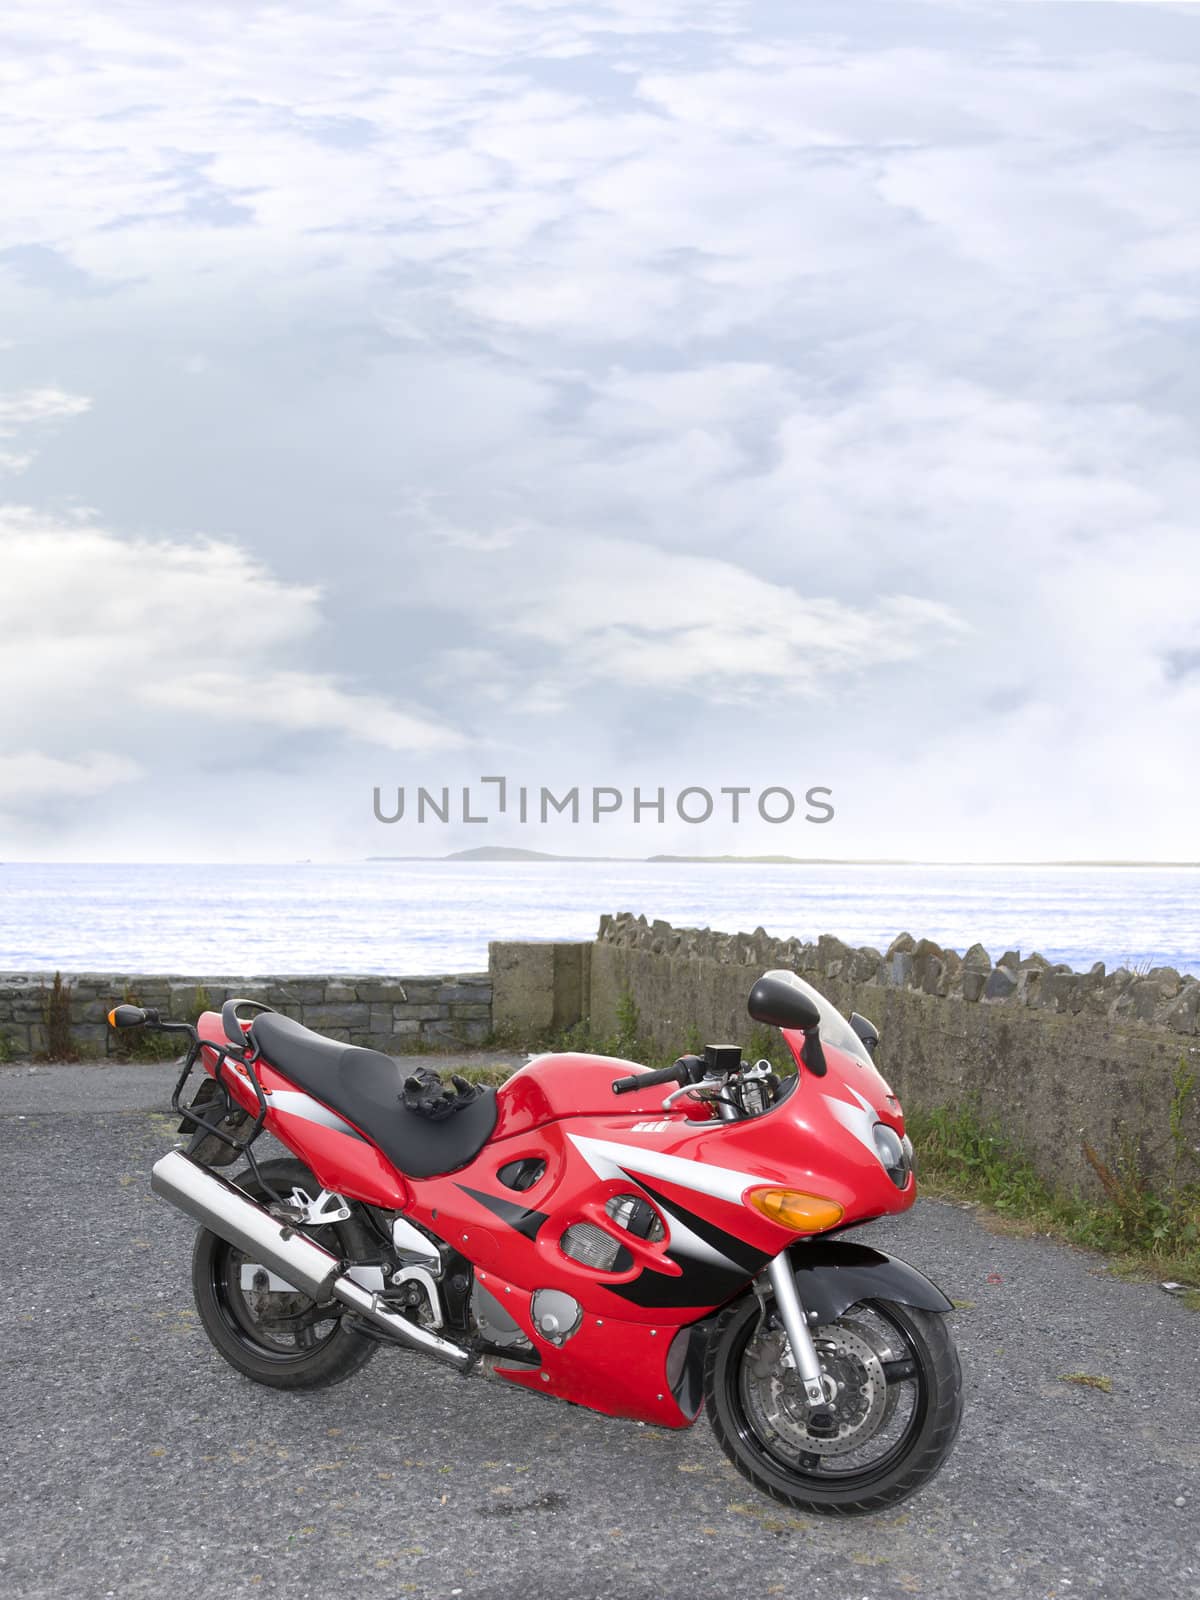 retro sports motorbike parked up in a scenic spot in ballybunion county kerry ireland